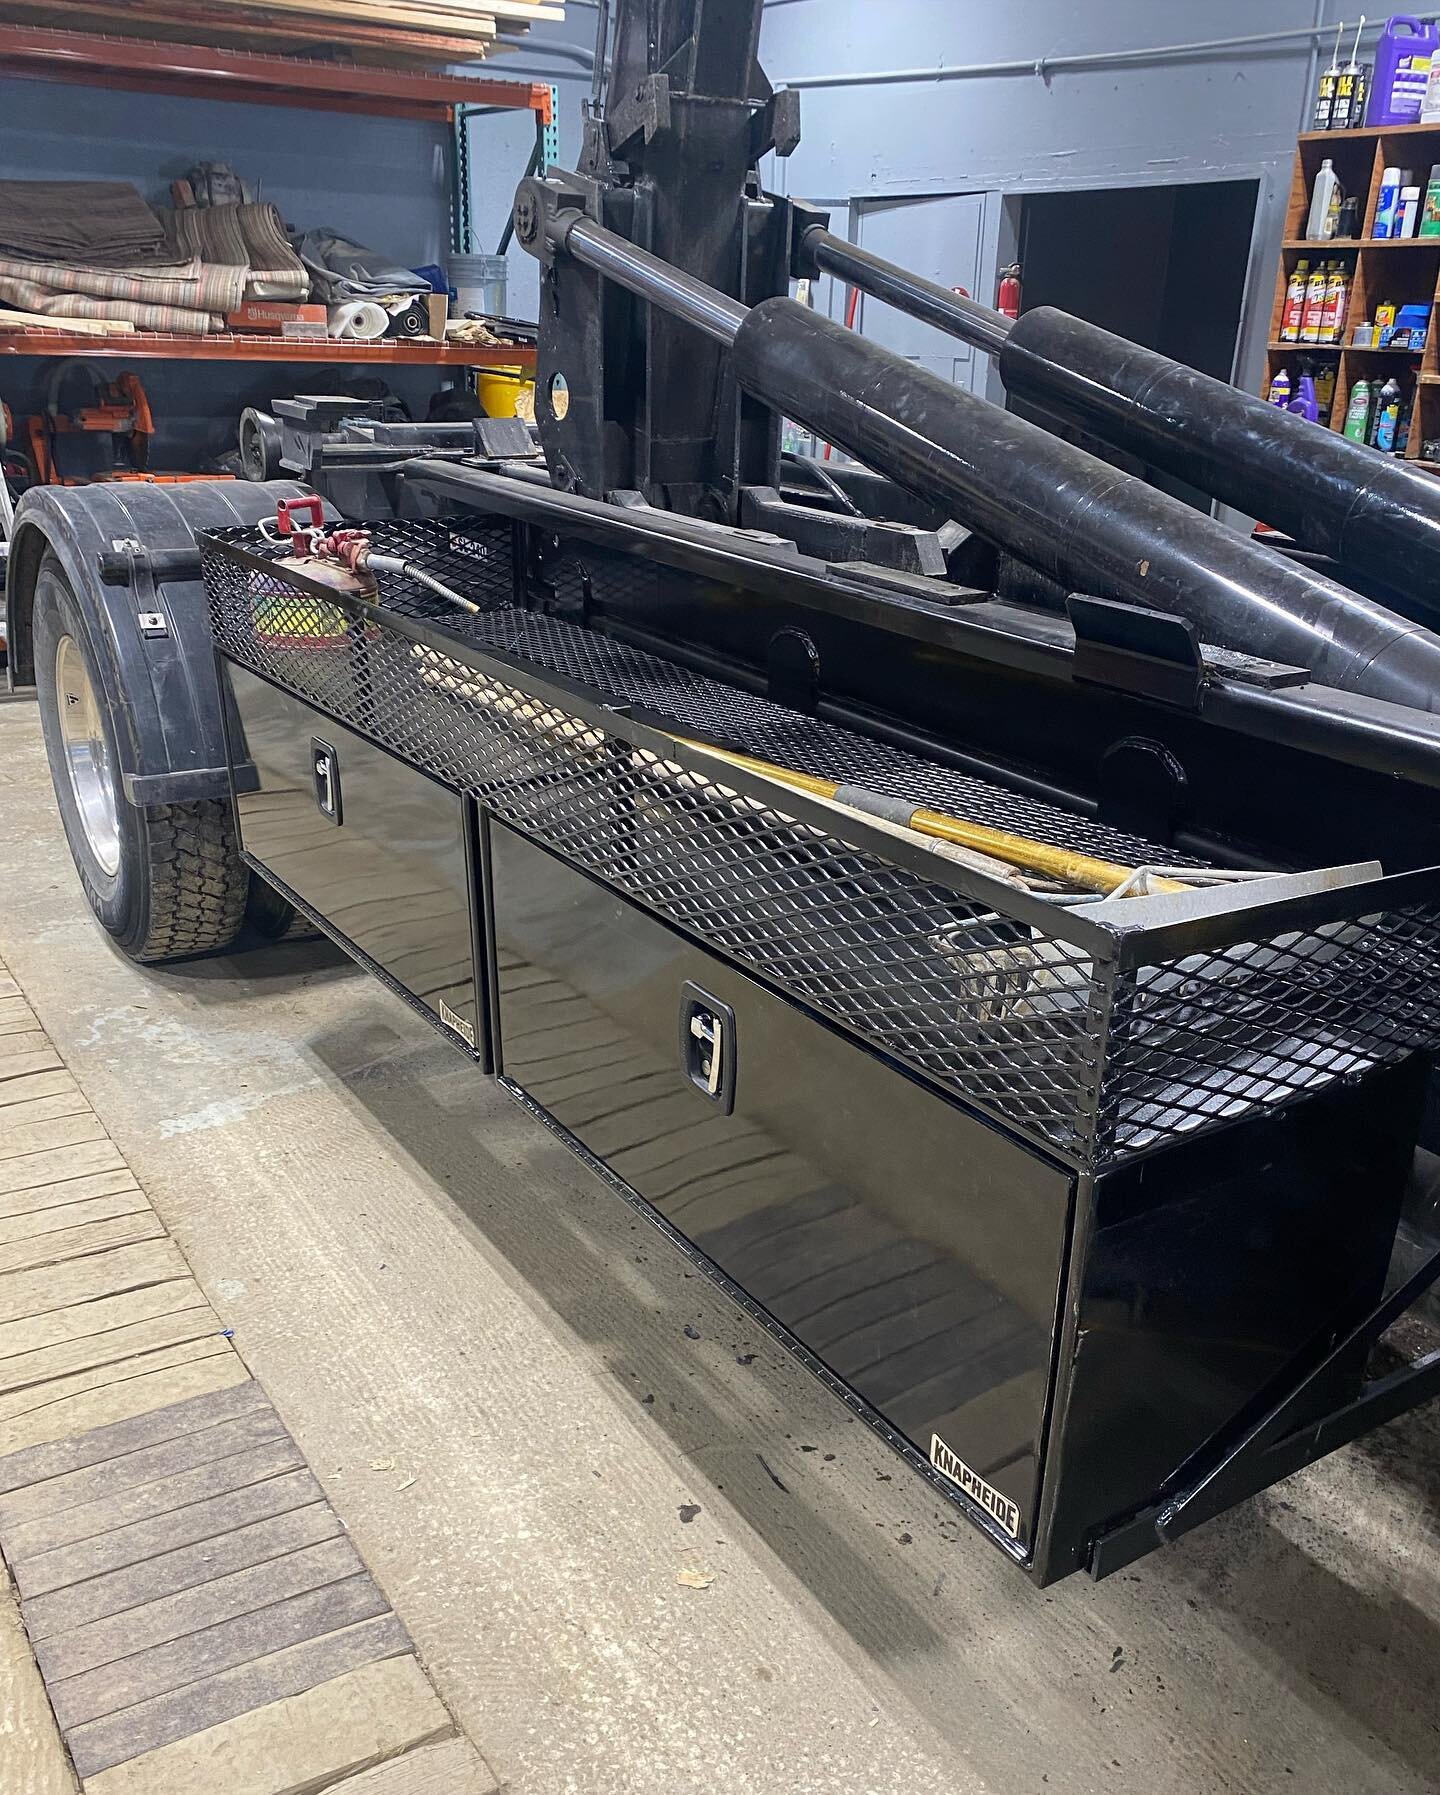 We completed our #swaploader truck fabrication by adding these tool boxes with a cage for storage above. We just stepped up our efficiency and organization game!!
#fabrication #welding #knapheide #hardscapebrotherhood